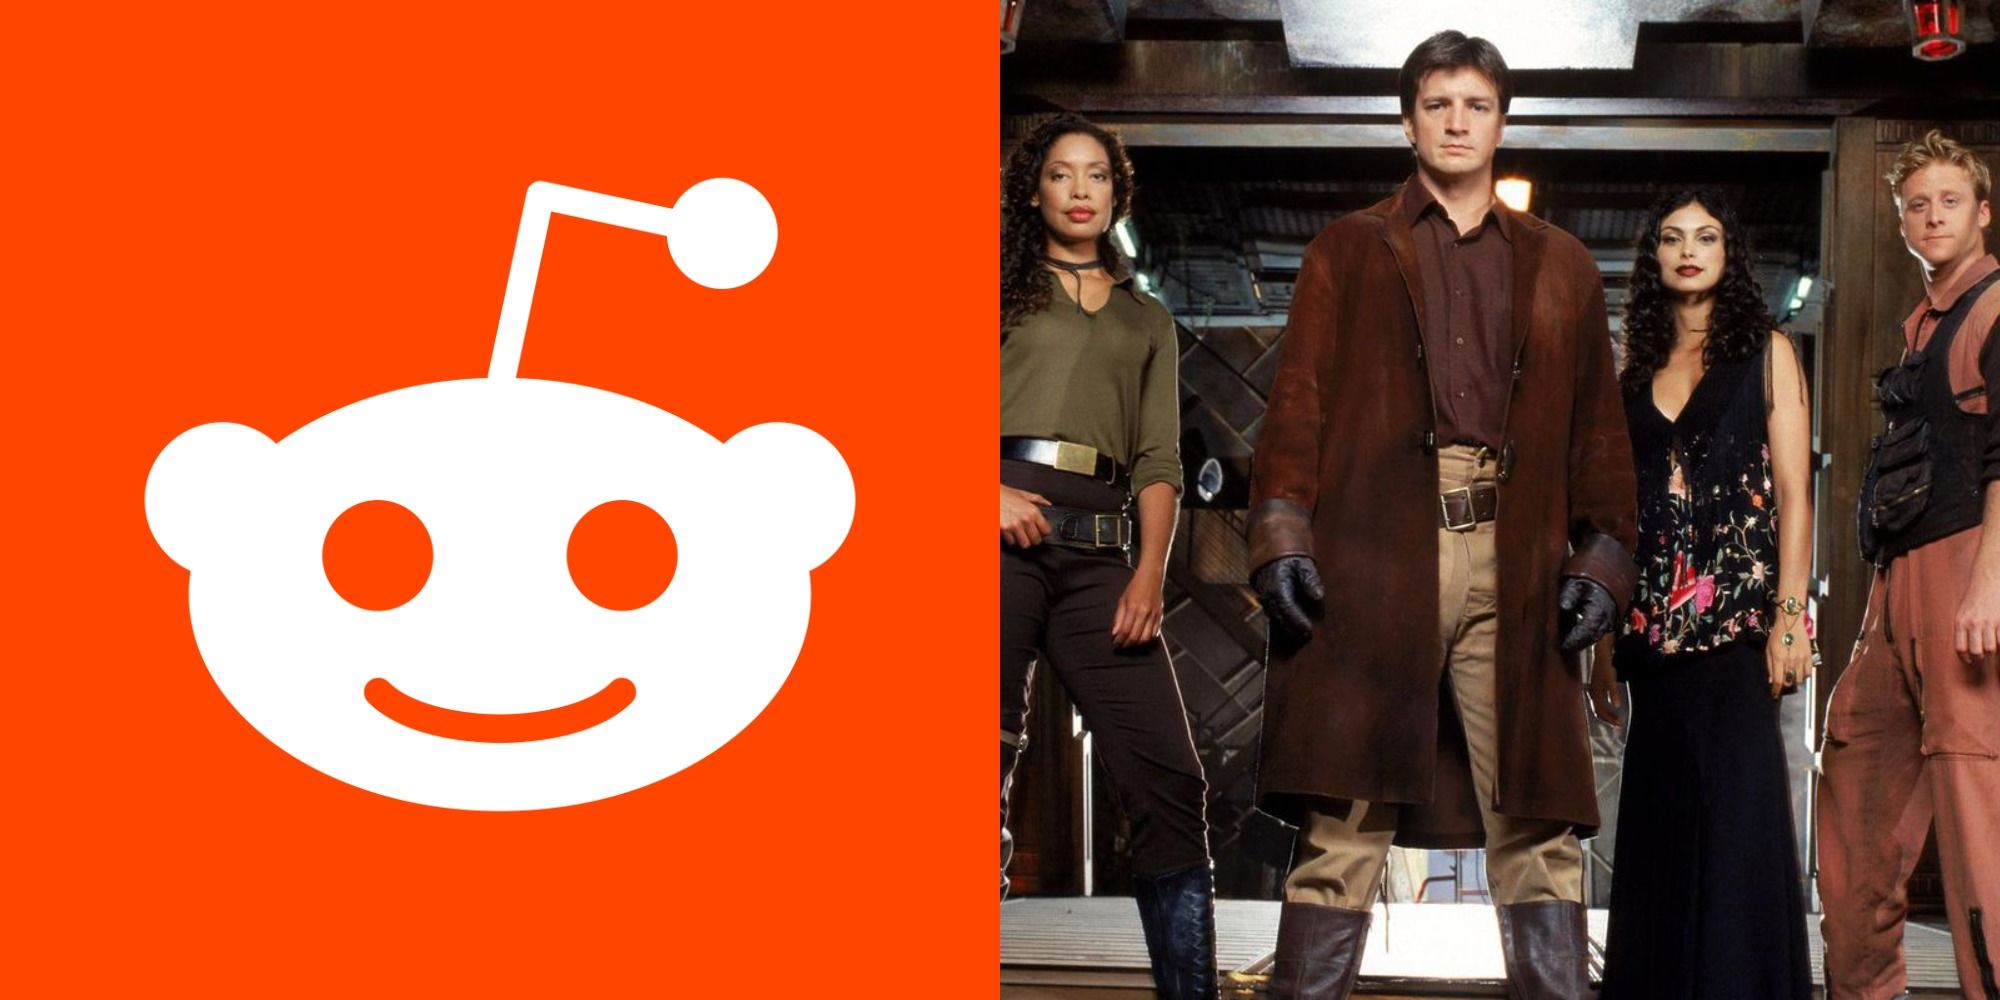 Firefly 10 FanFavorite Moments According To Reddit